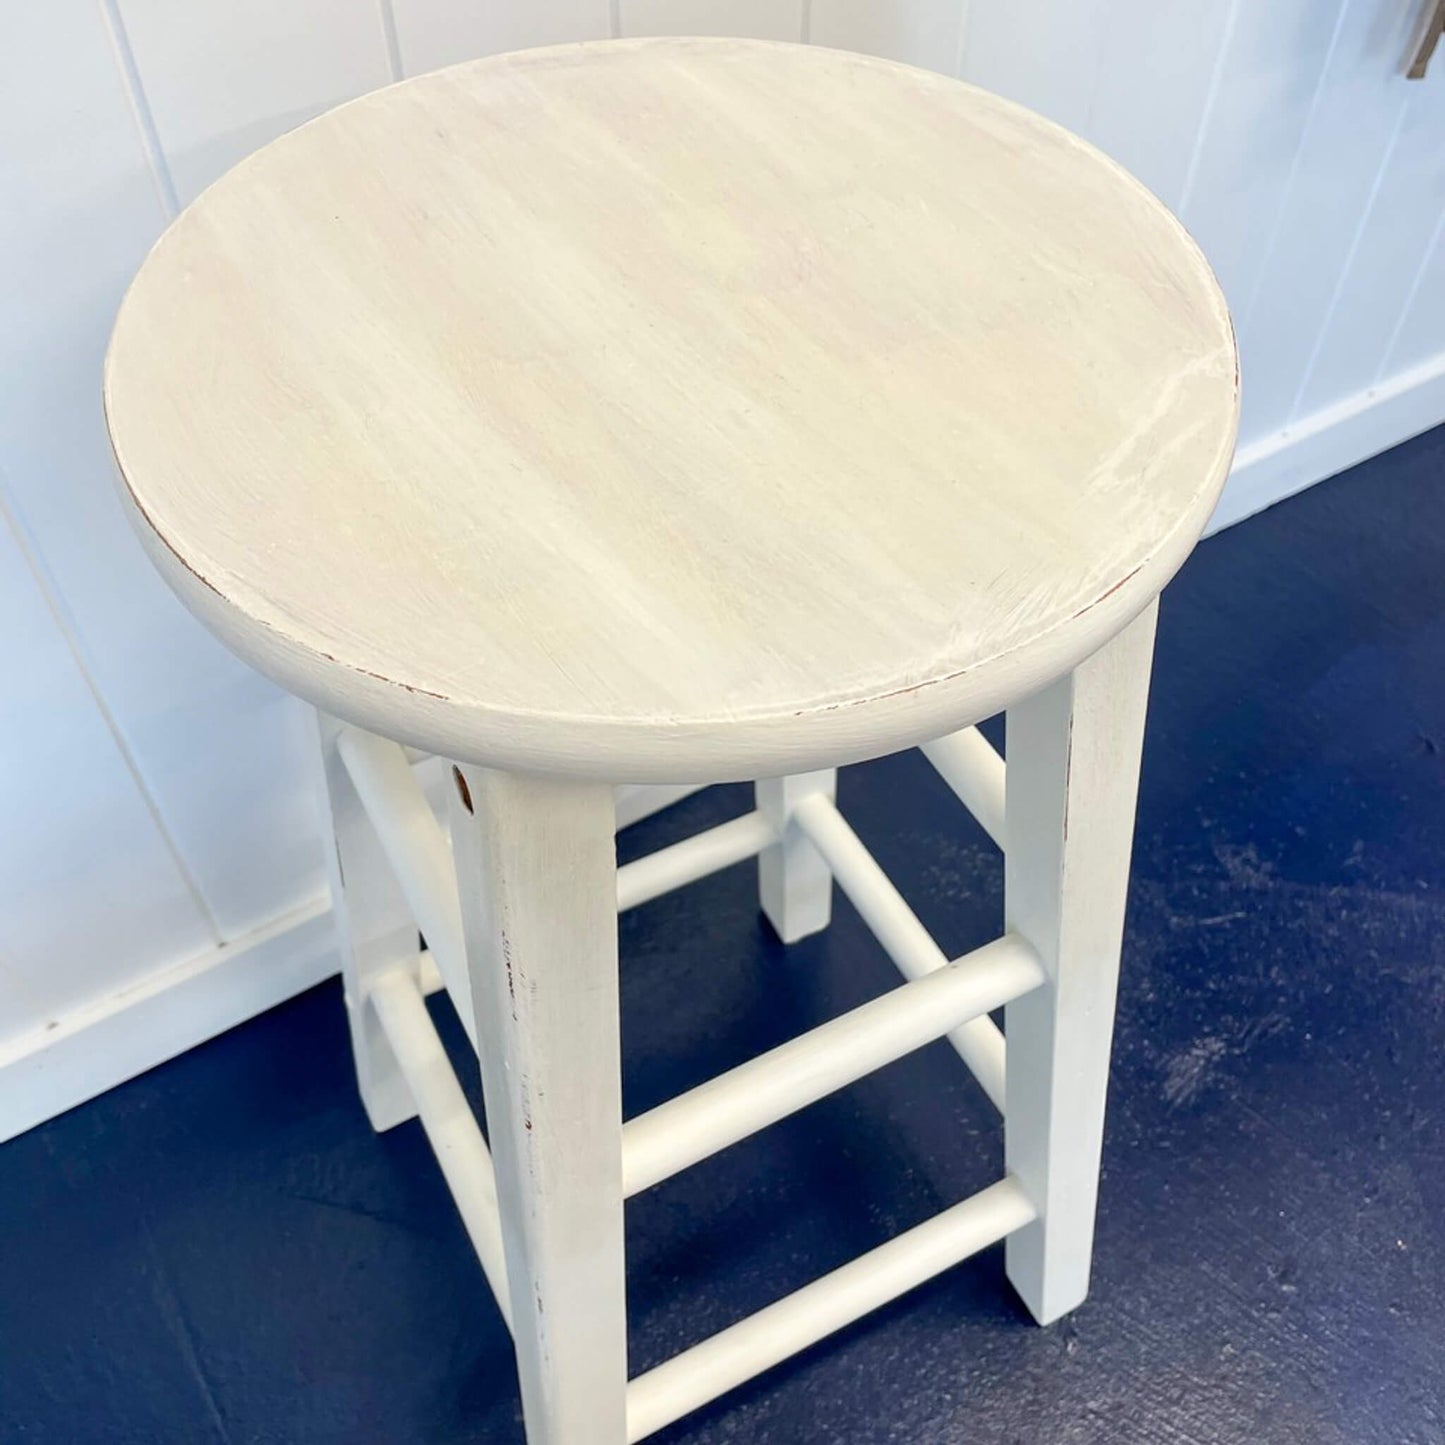 Timber stool painted with Blake & Taylor Chalk Furniture Paint White Wash